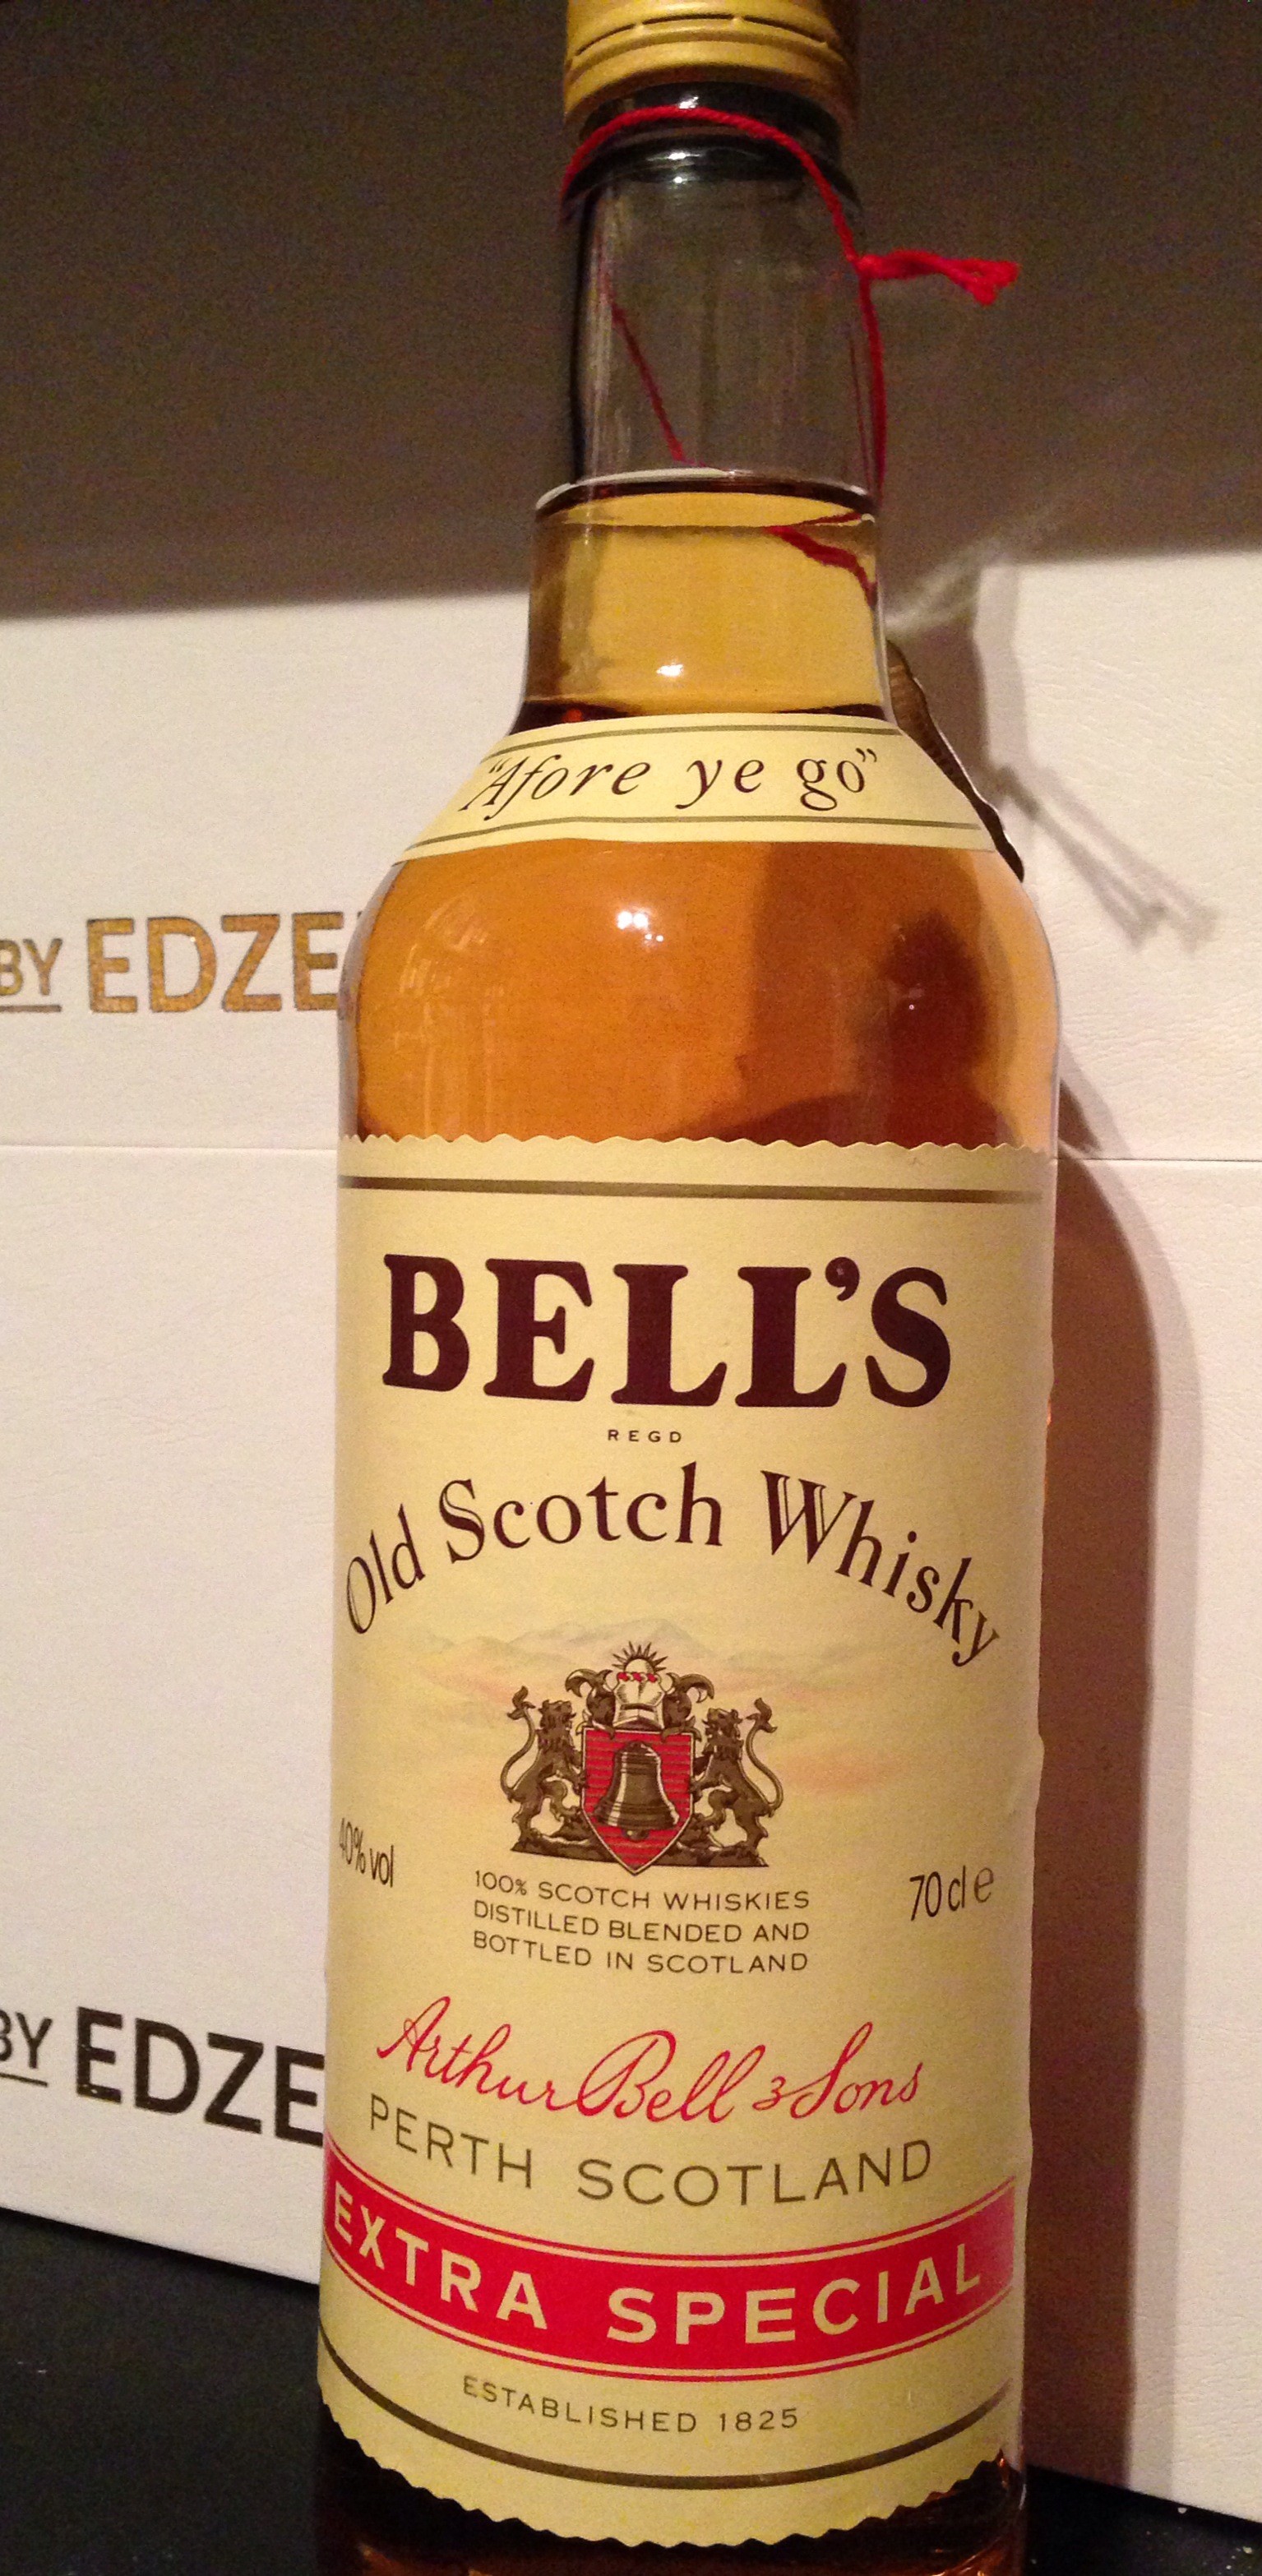 Bell's Scotch Whisky 'Old Bottle' Circa 1970